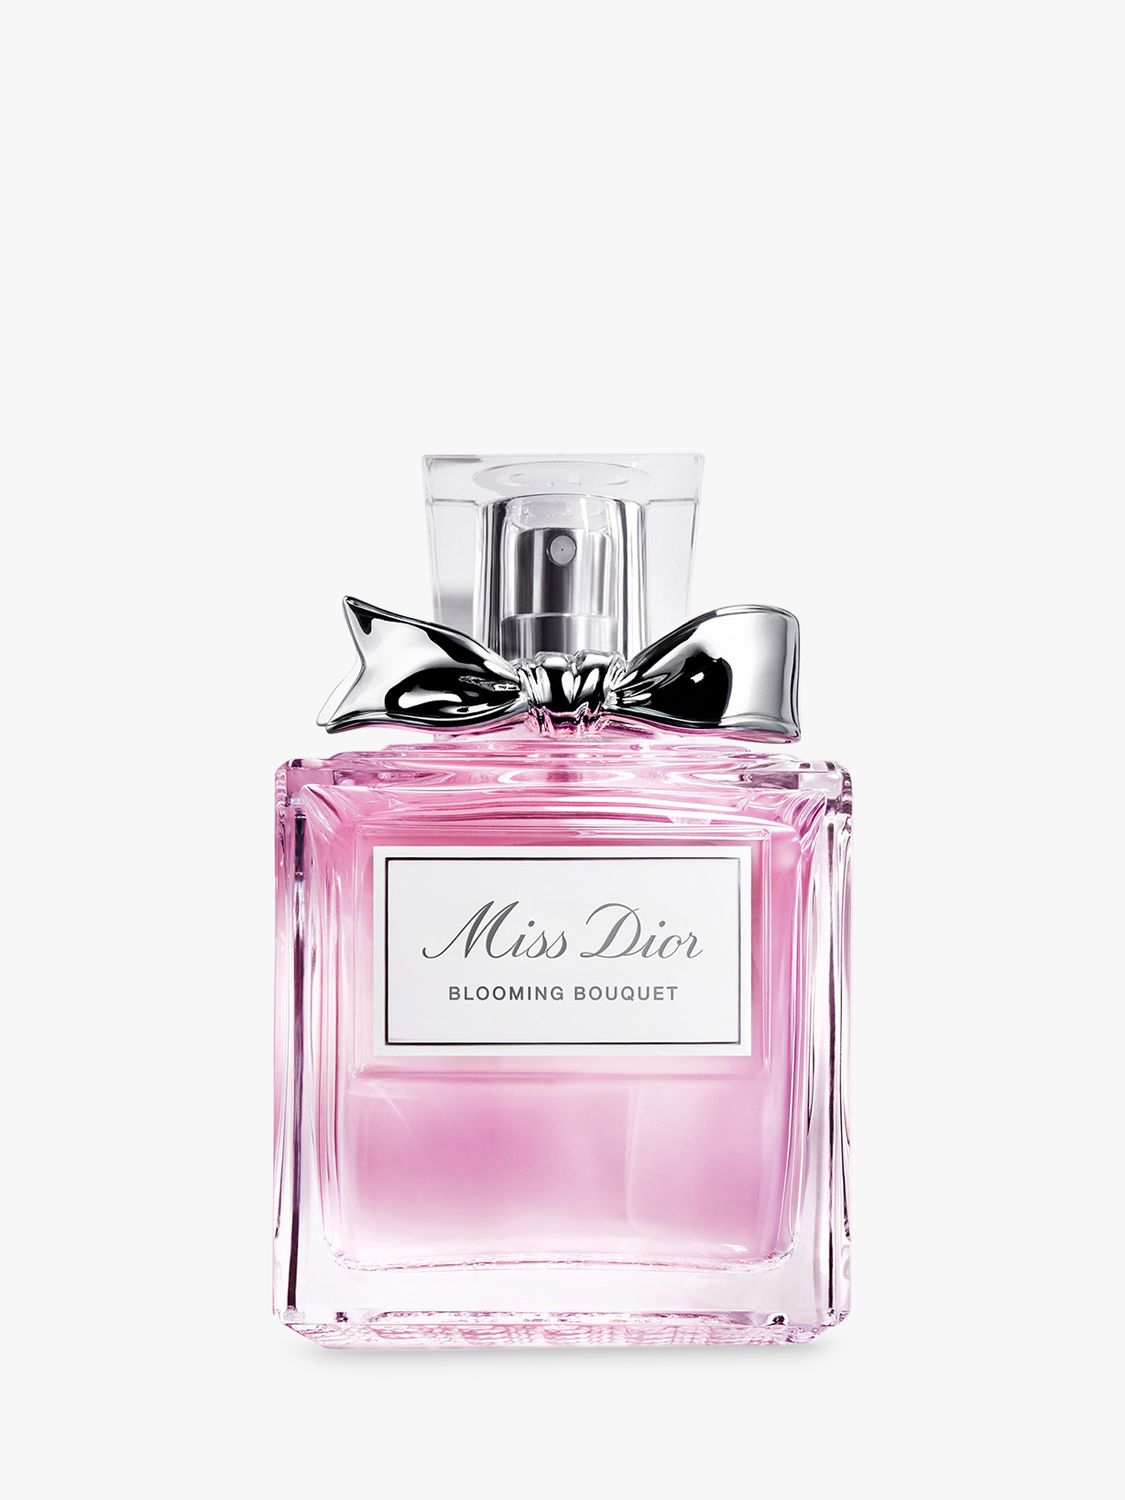 miss dior blooming bouquet perfume